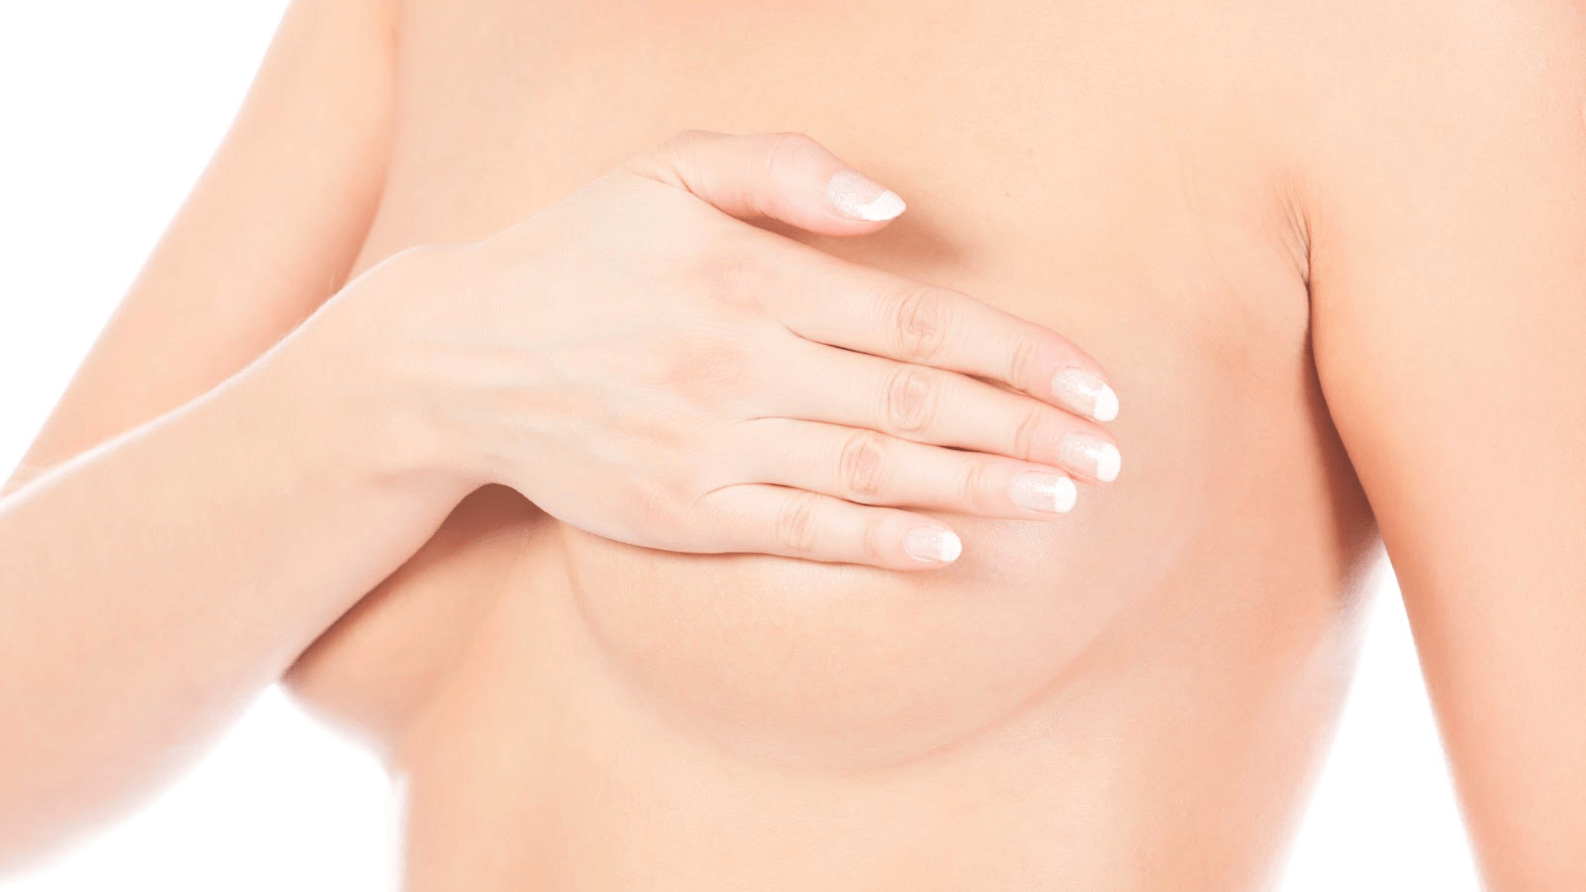 How to Keep Your Breasts Perky